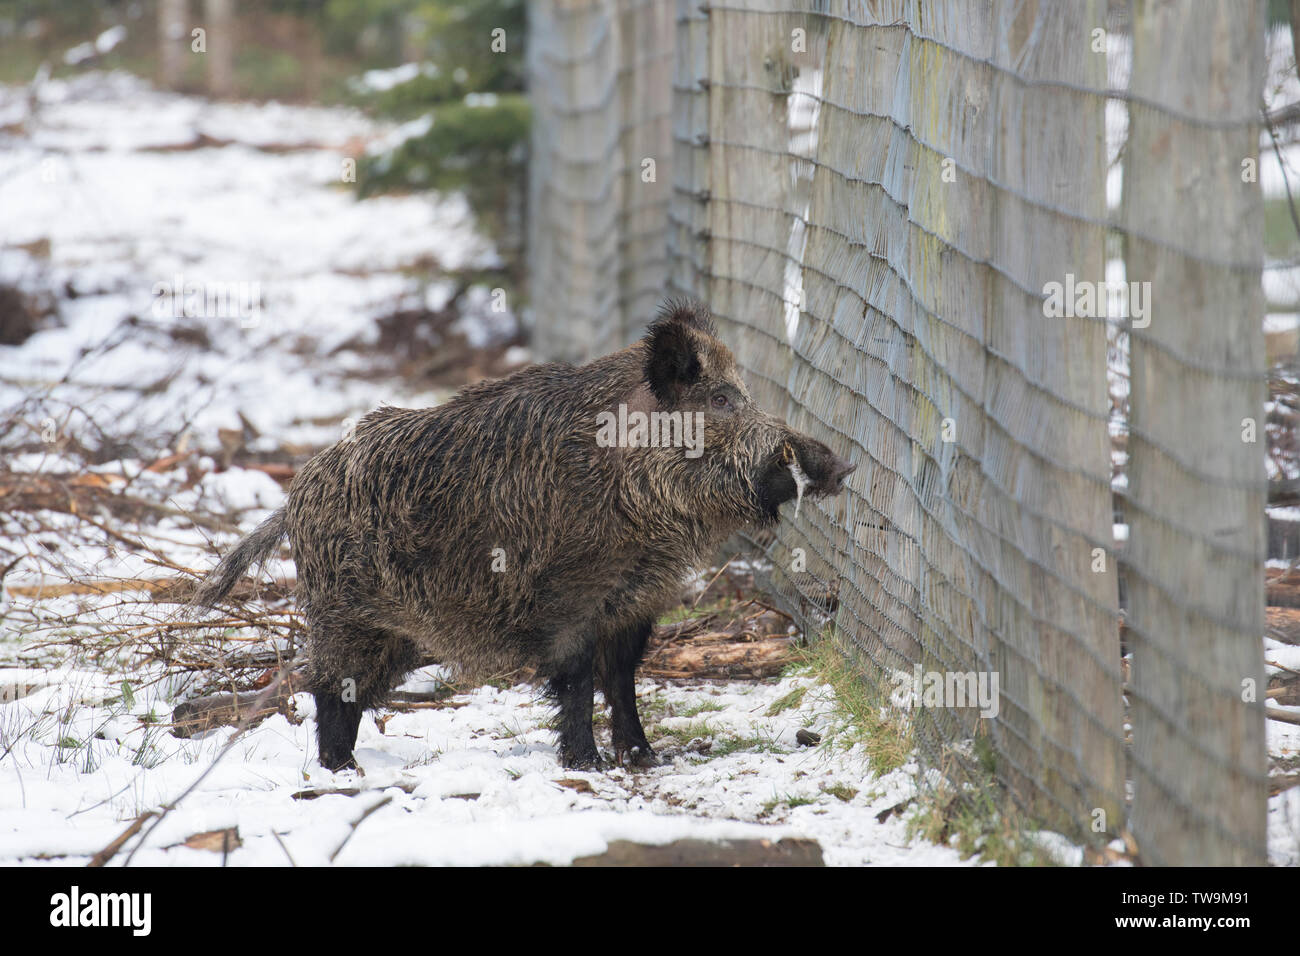 Wild Boar (Sus scrofa). Male standing next to a fence. Germany Stock Photo